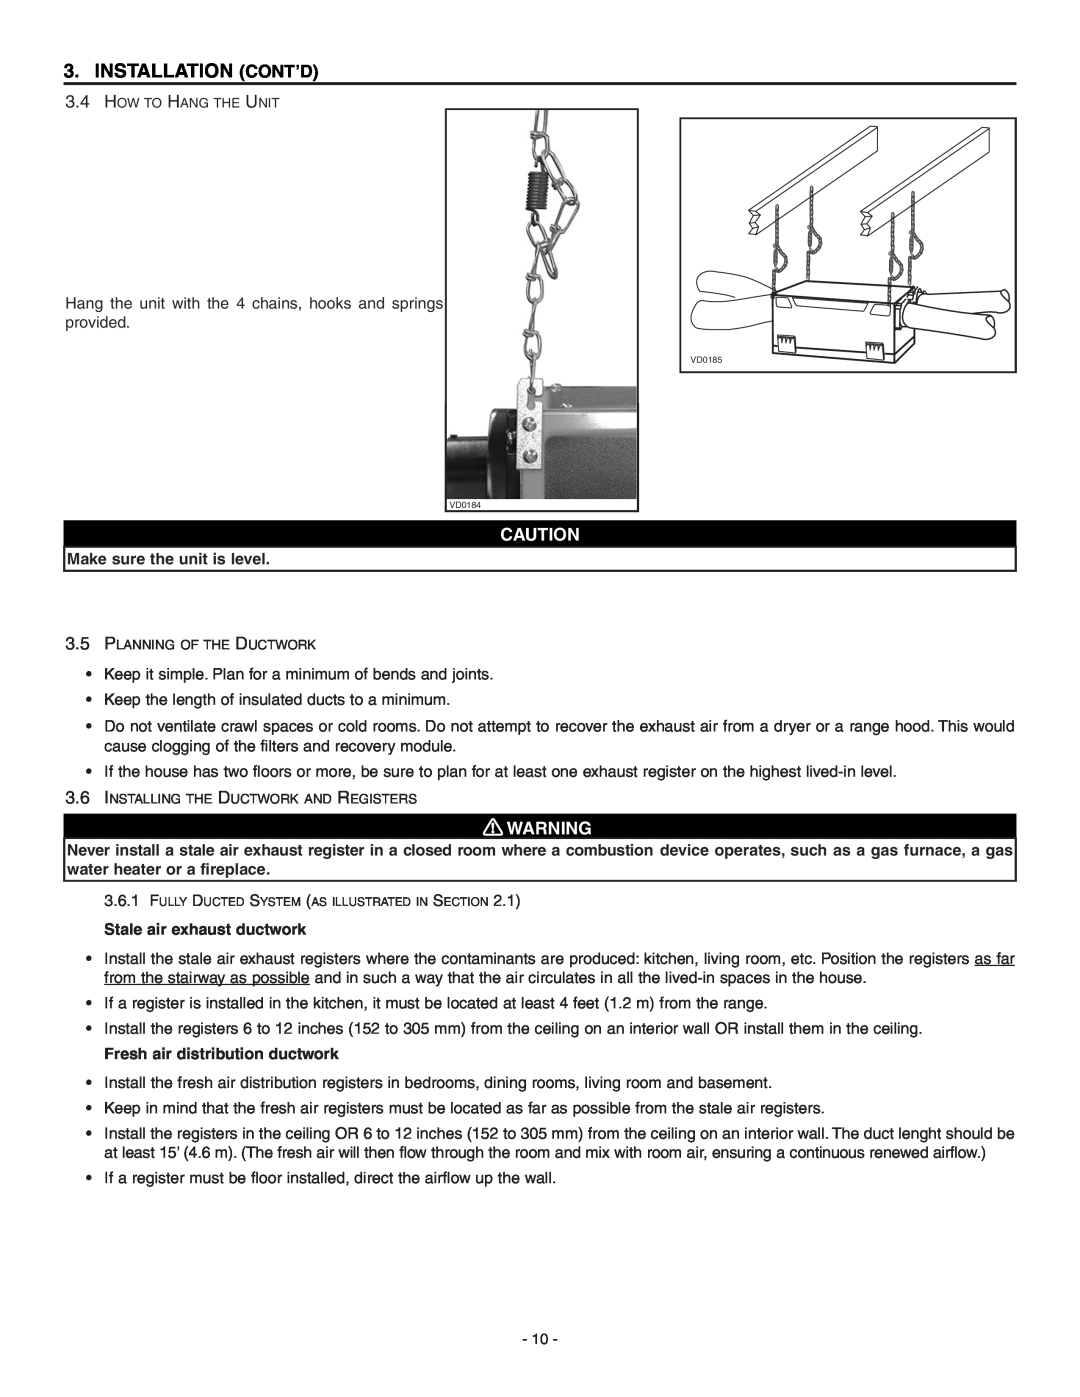 Broan ERV90HCT installation instructions Installation Cont’D, Make sure the unit is level, Stale air exhaust ductwork 